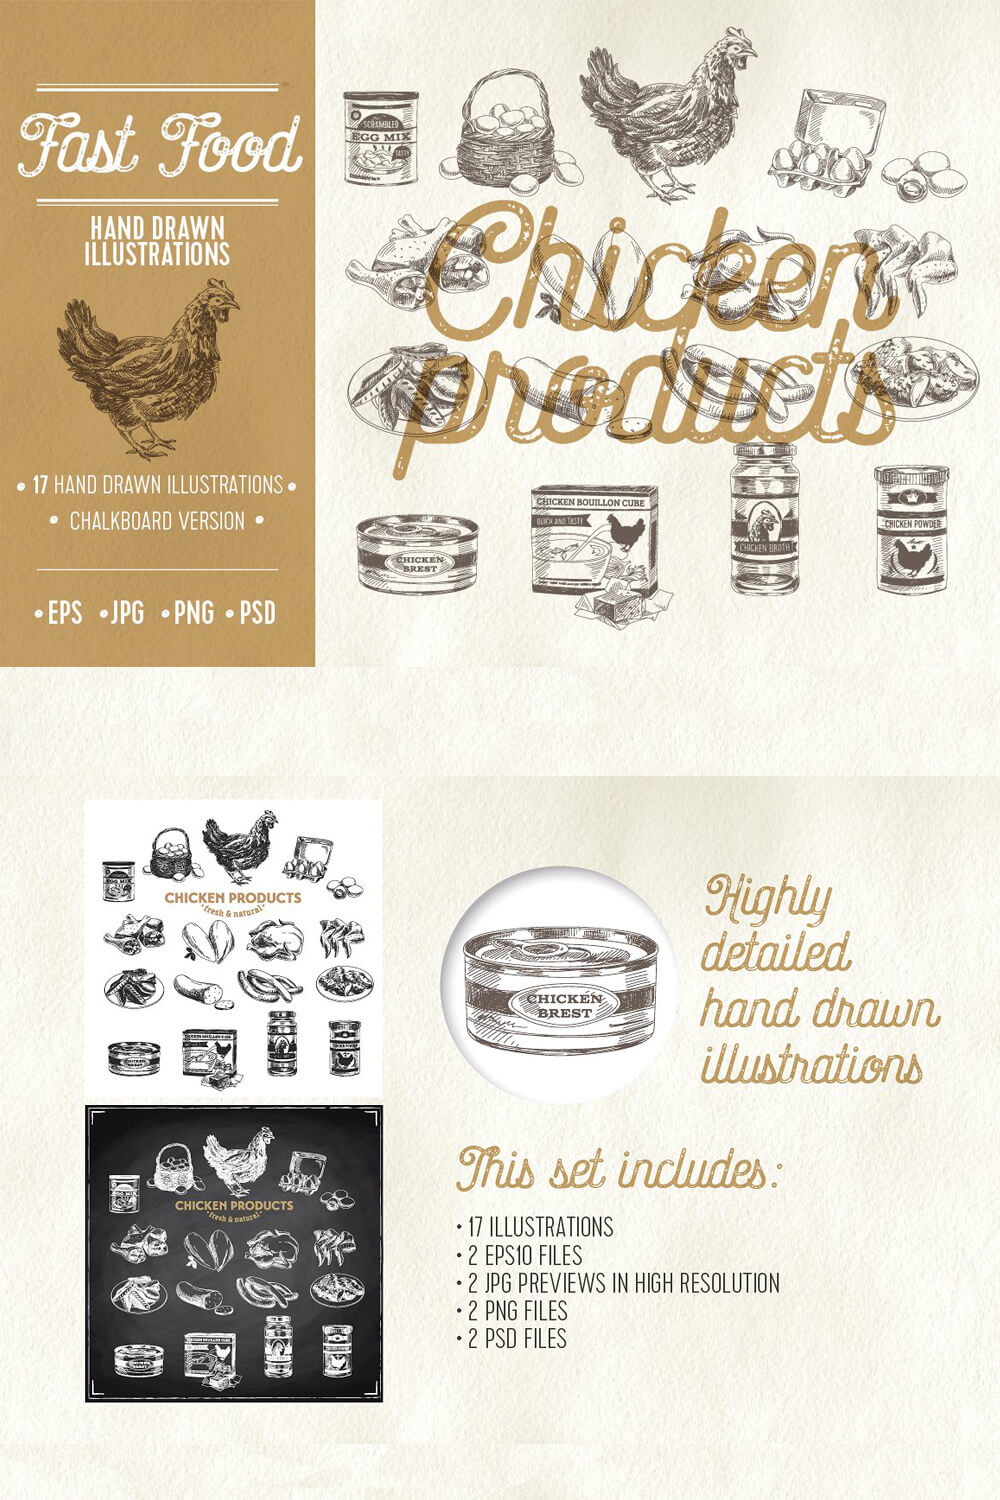 Chicken products includes 17 hand drawn illustrations and chalkboard version.